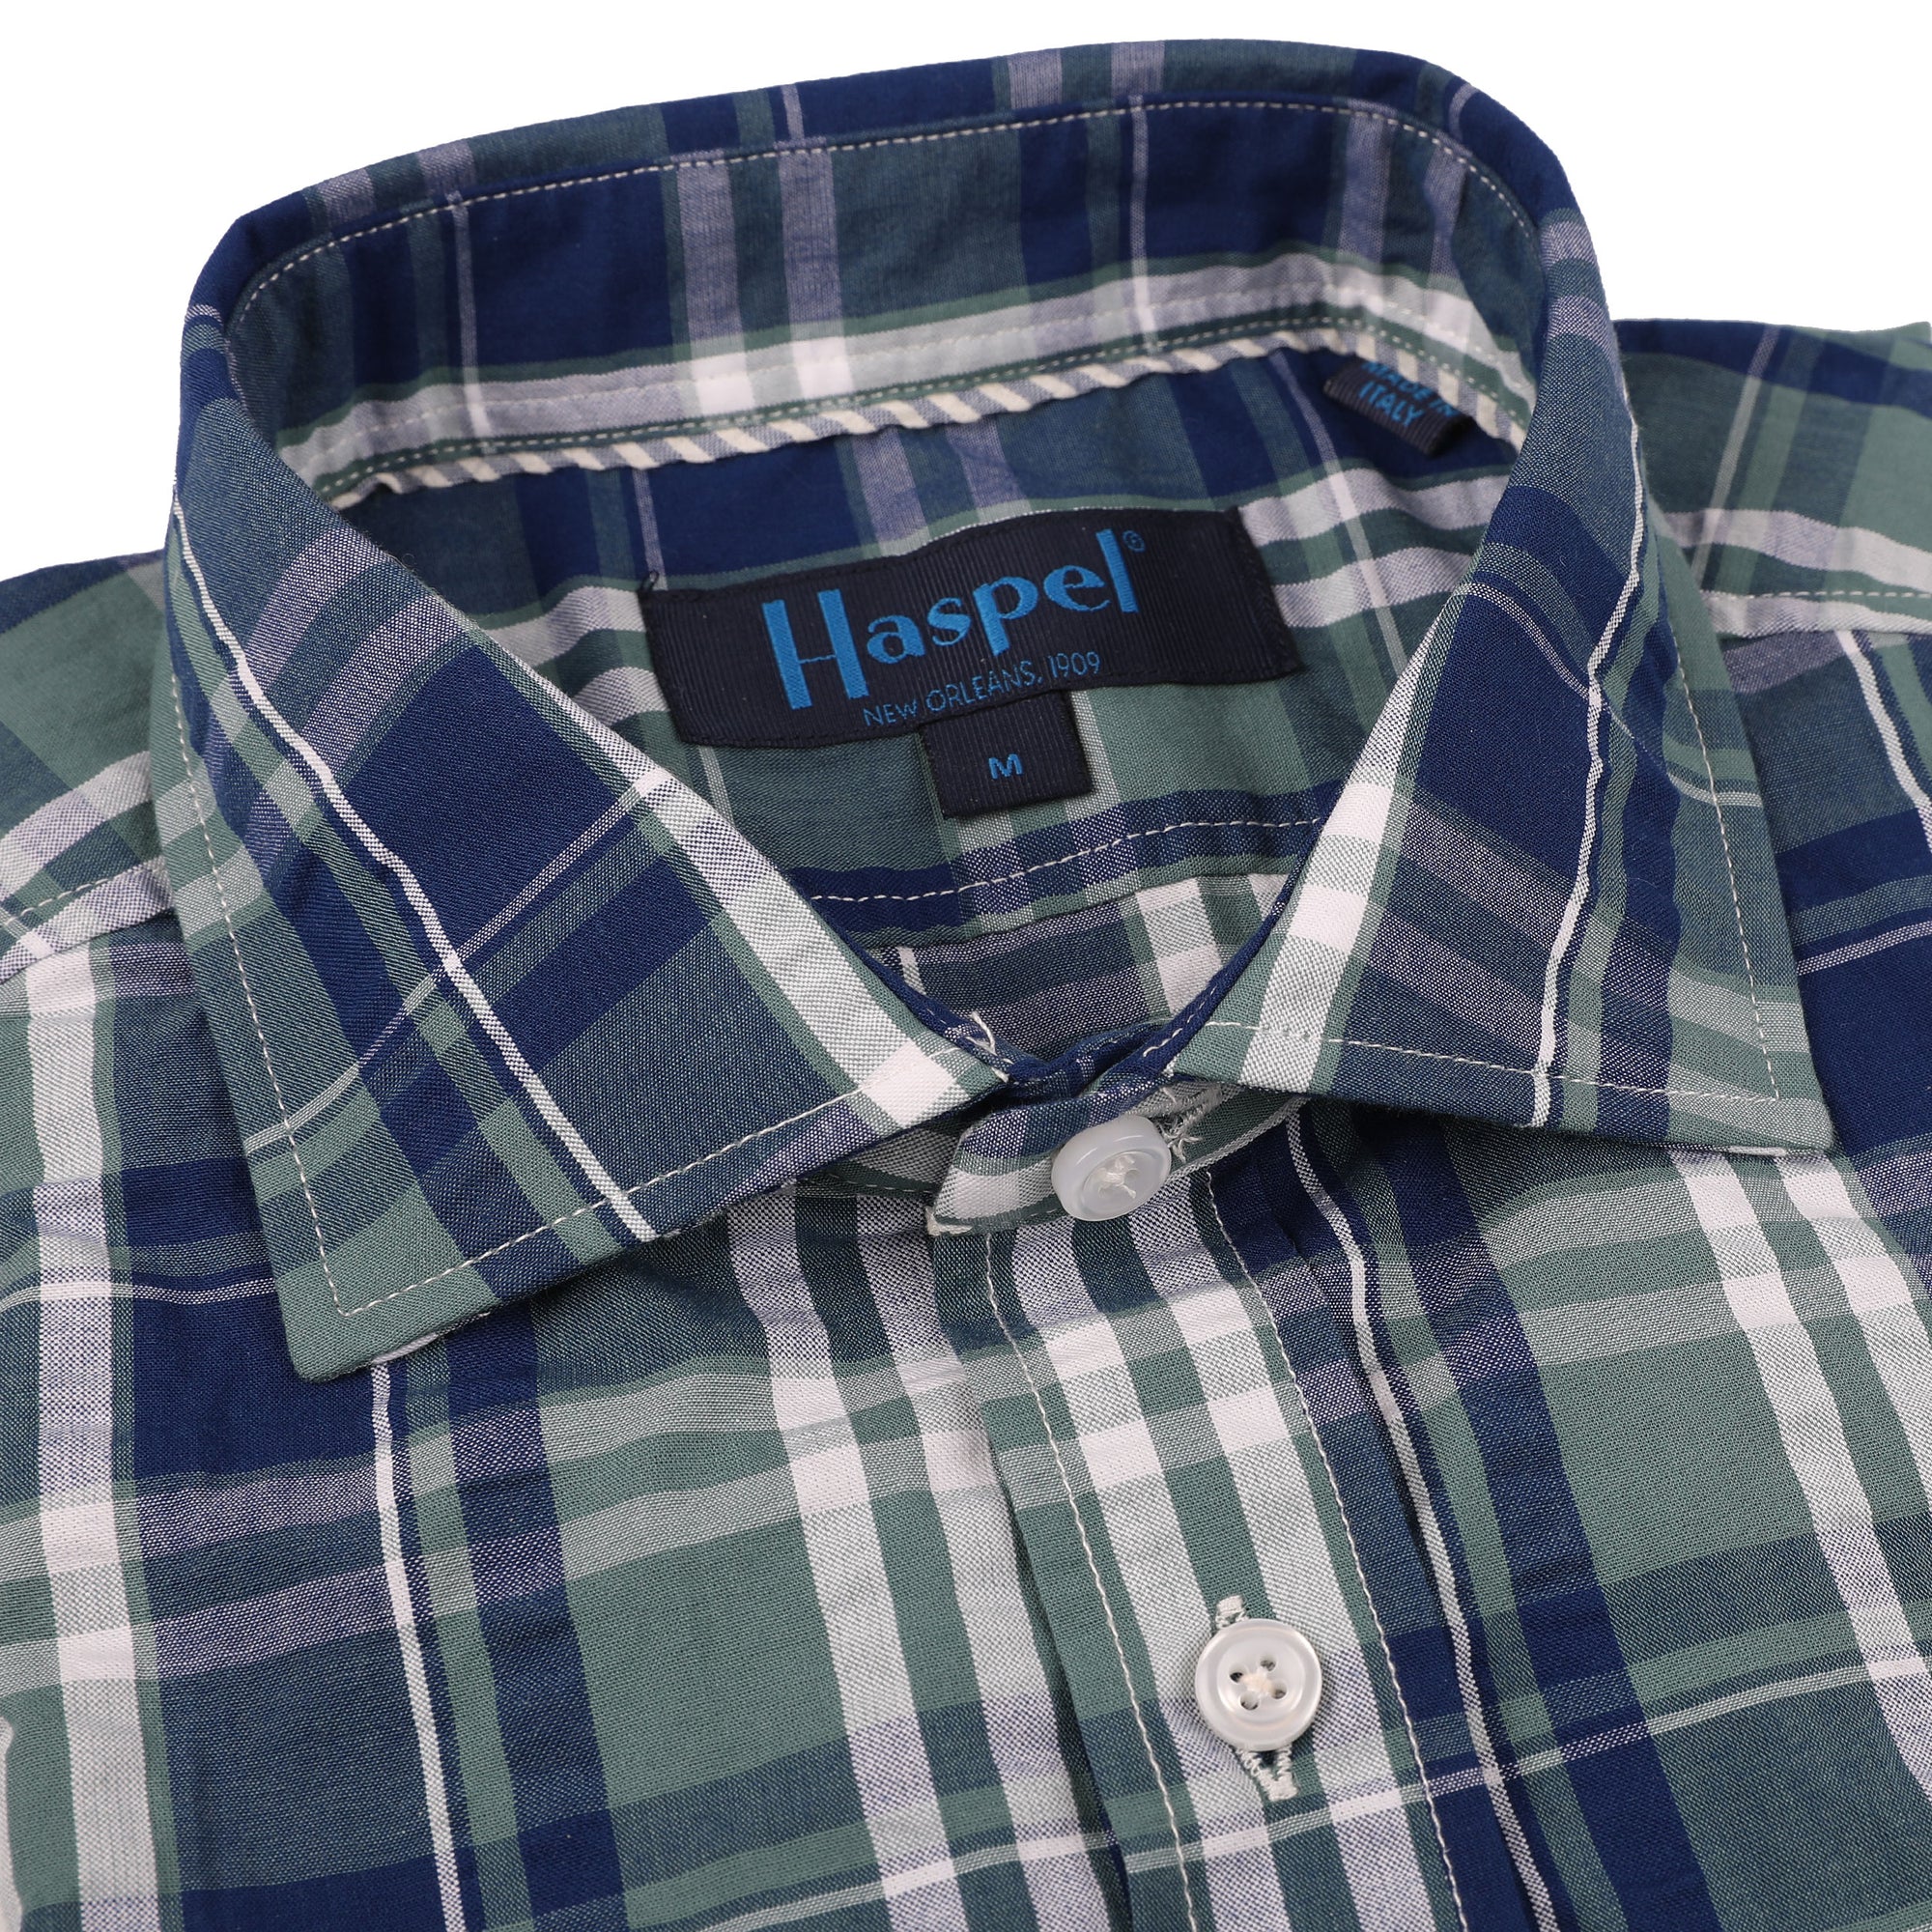 Channel the colors of the sea in a decidedly chic way with our Chartres Blue & Green Seersucker fabric. This lightweight plaid is sure to give your wardrobe a splash of color as cool as a sea breeze.  100% Cotton • Spread Collar with Removable Collar Stays • Long Sleeve • Chest Pocket • Machine Washable • Made in Italy • Return Policy